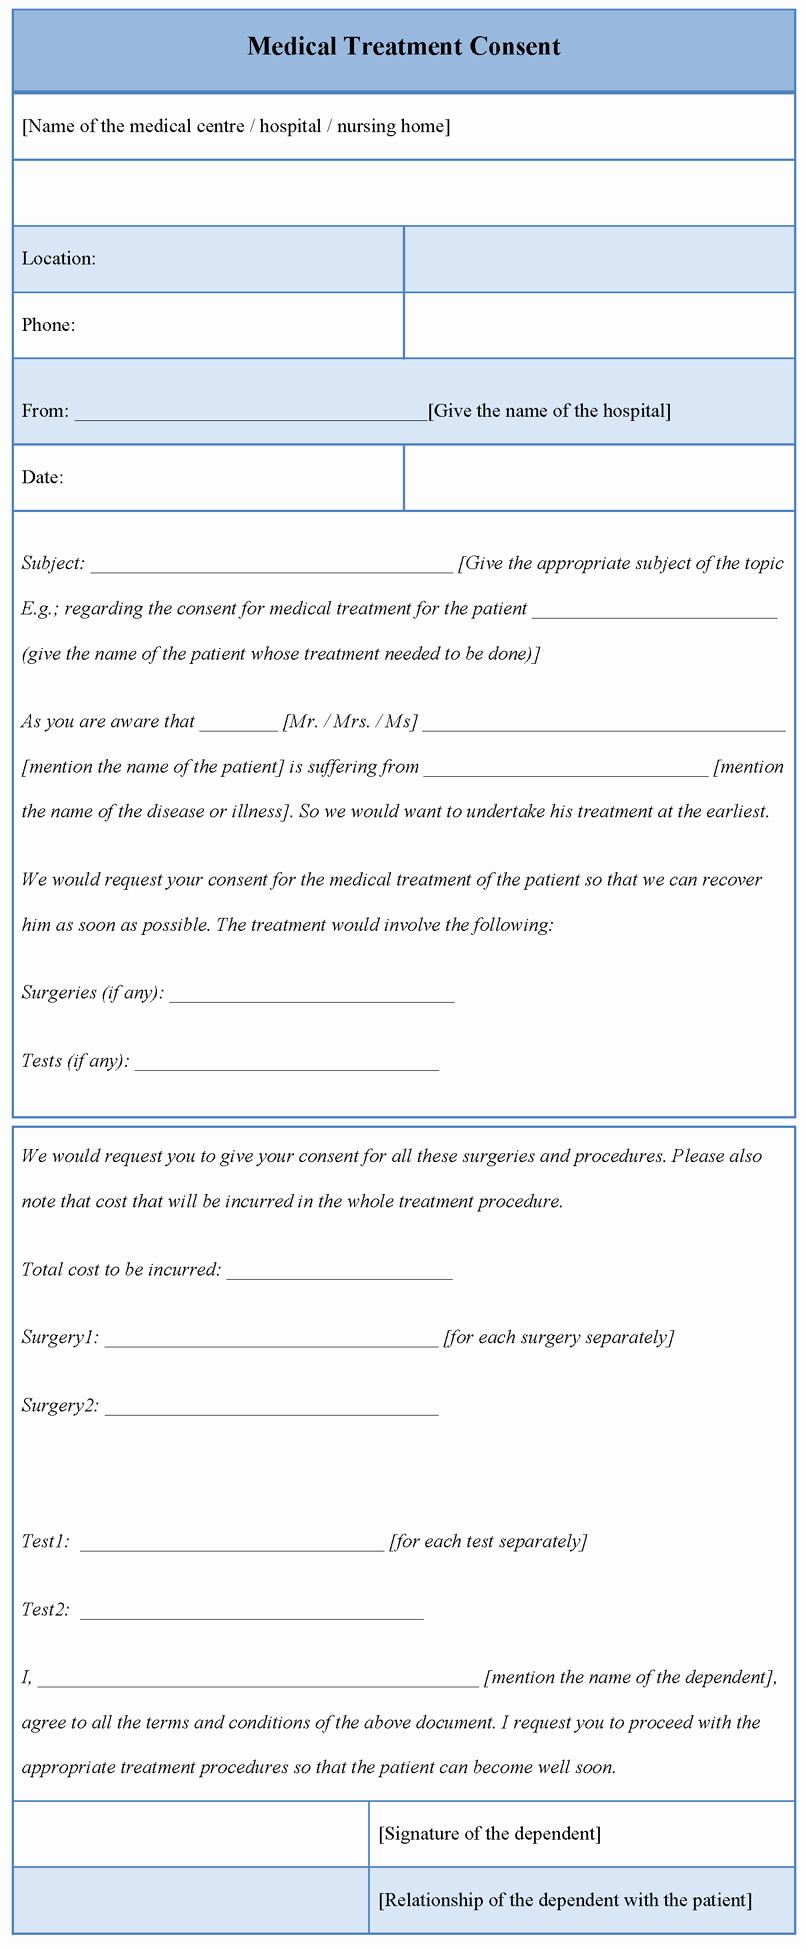 Medical Treatment Consent form Driverlayer Search Engine